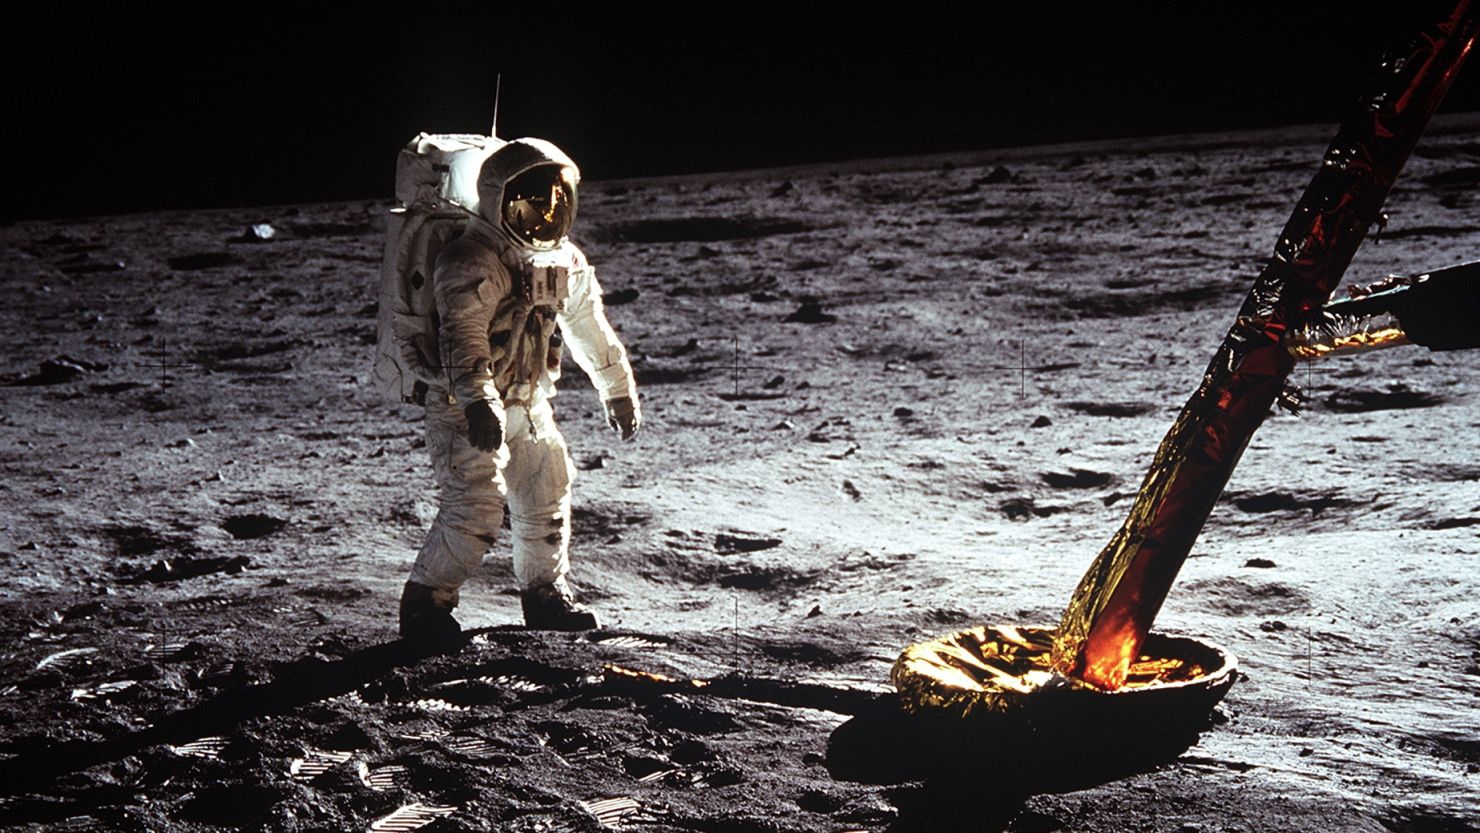 Lunar Anthropocene: Scientists Say The Moon Has Entered A New Epoch